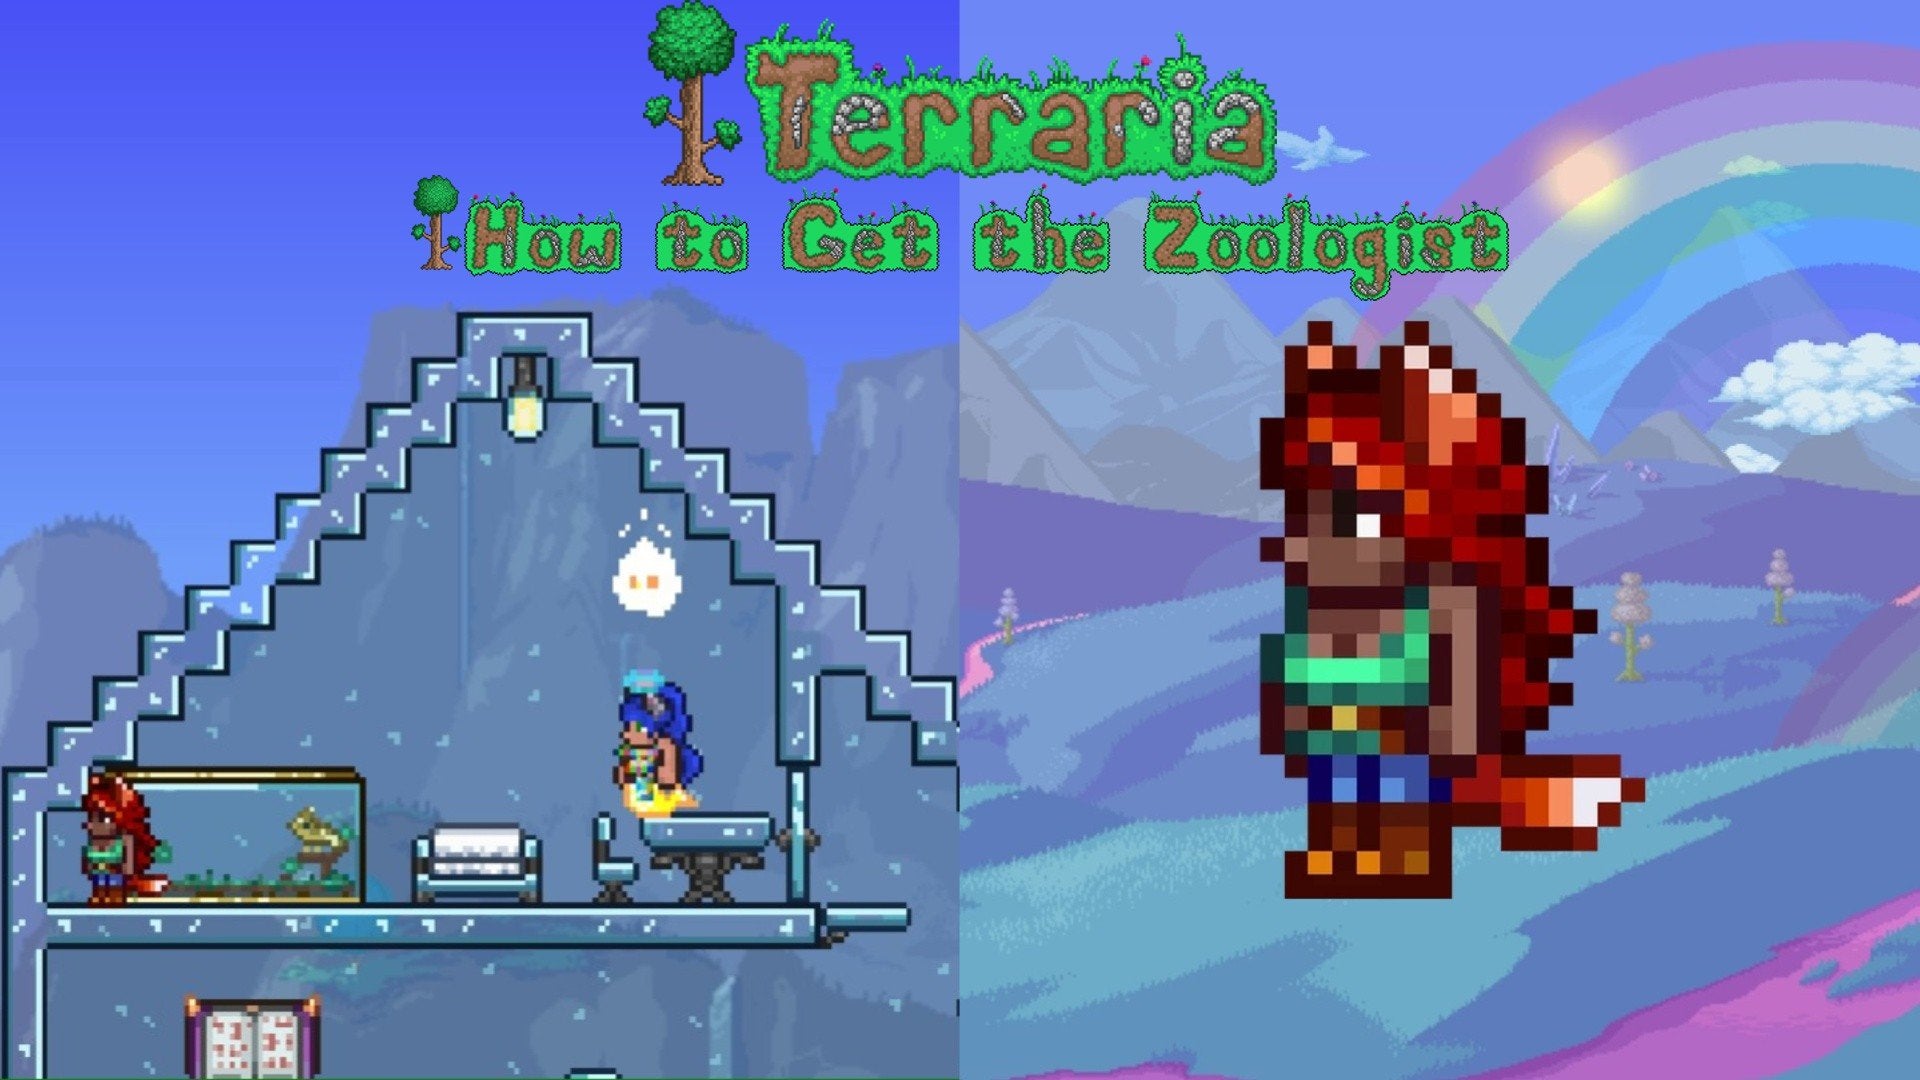 To the left is a player standing next to the Zoologist in a house and to the right is a closeup of the Zoologist NPC.